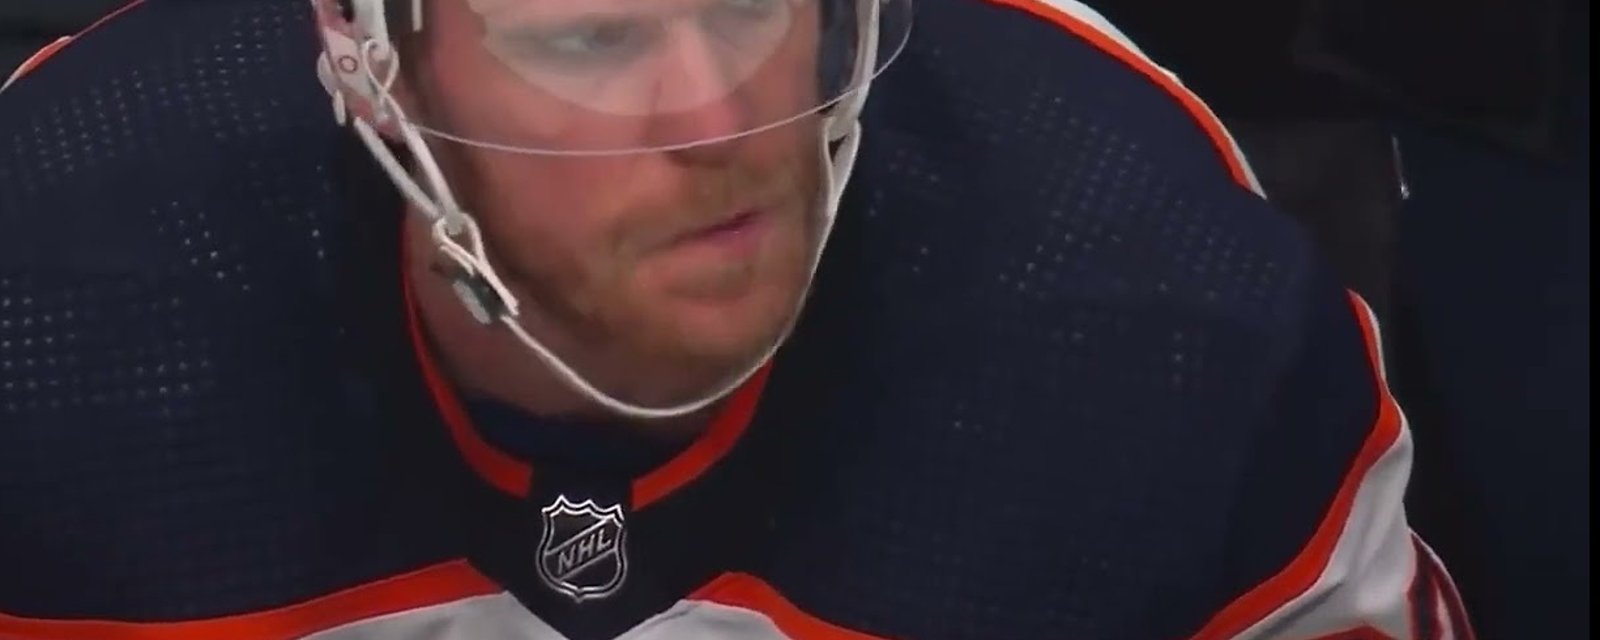 Outrage around Connor McDavid ahead of Game 1 in series vs. Vancouver